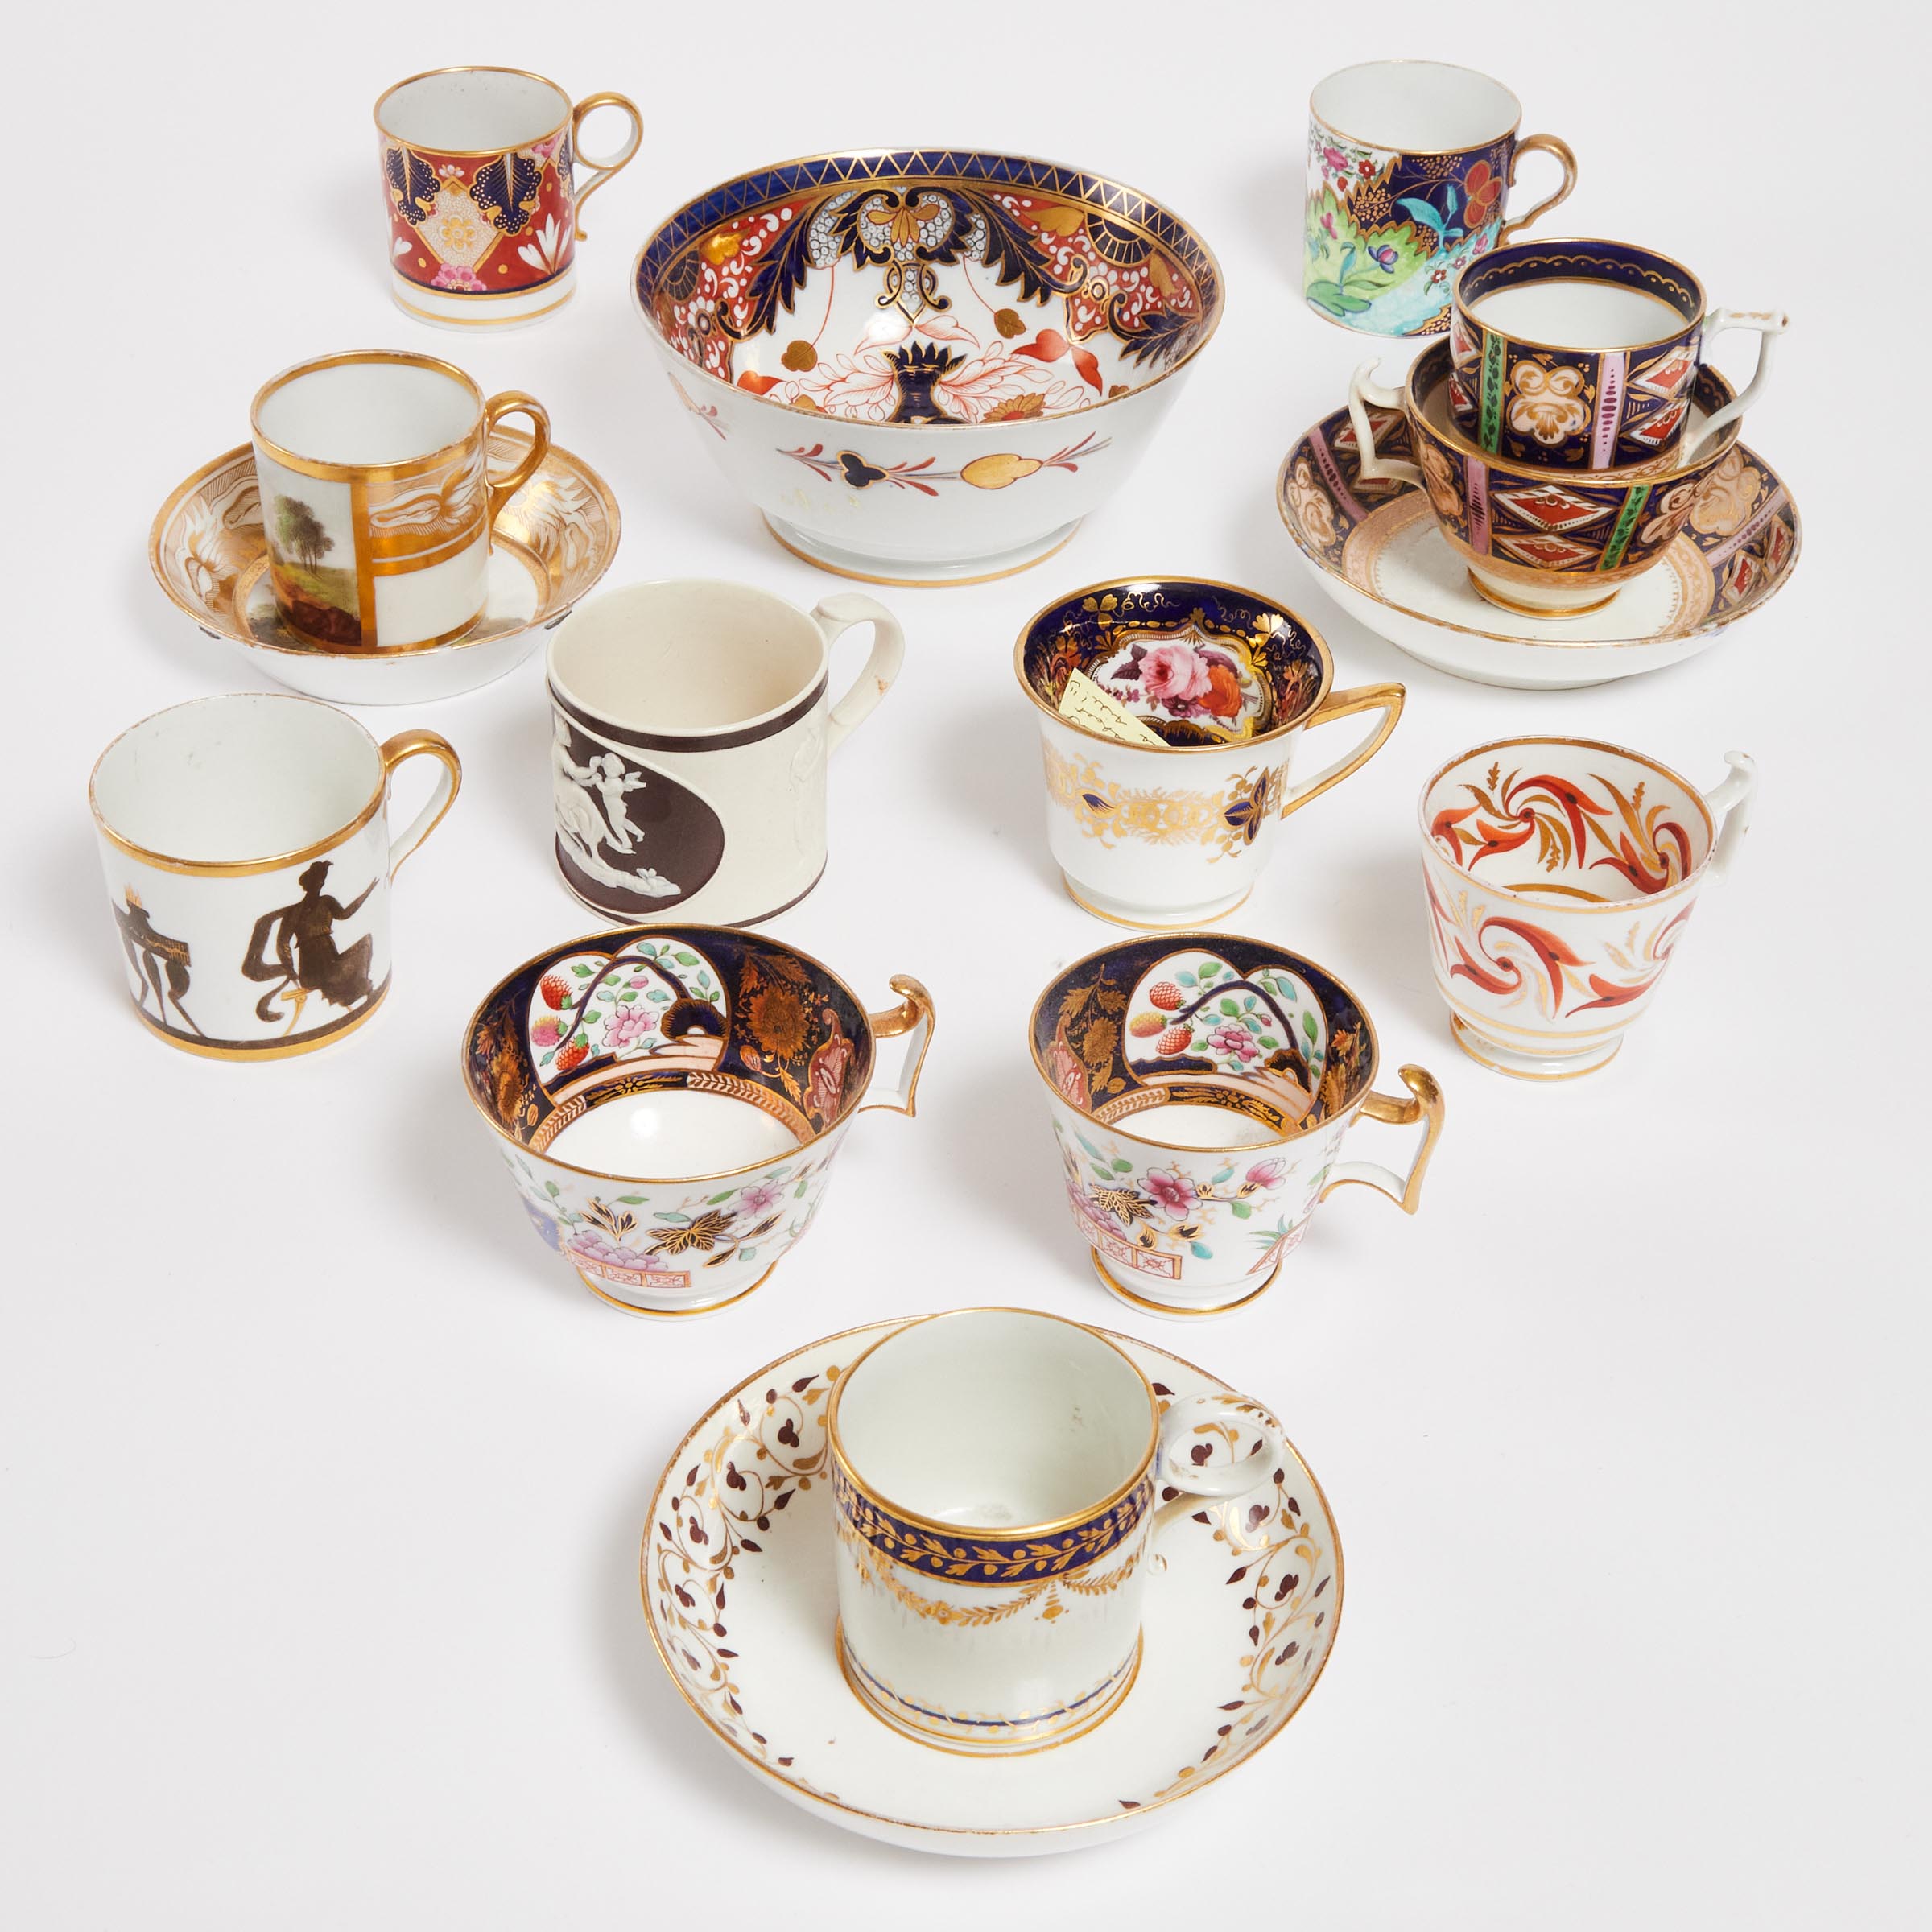 Group of English Porcelain, early